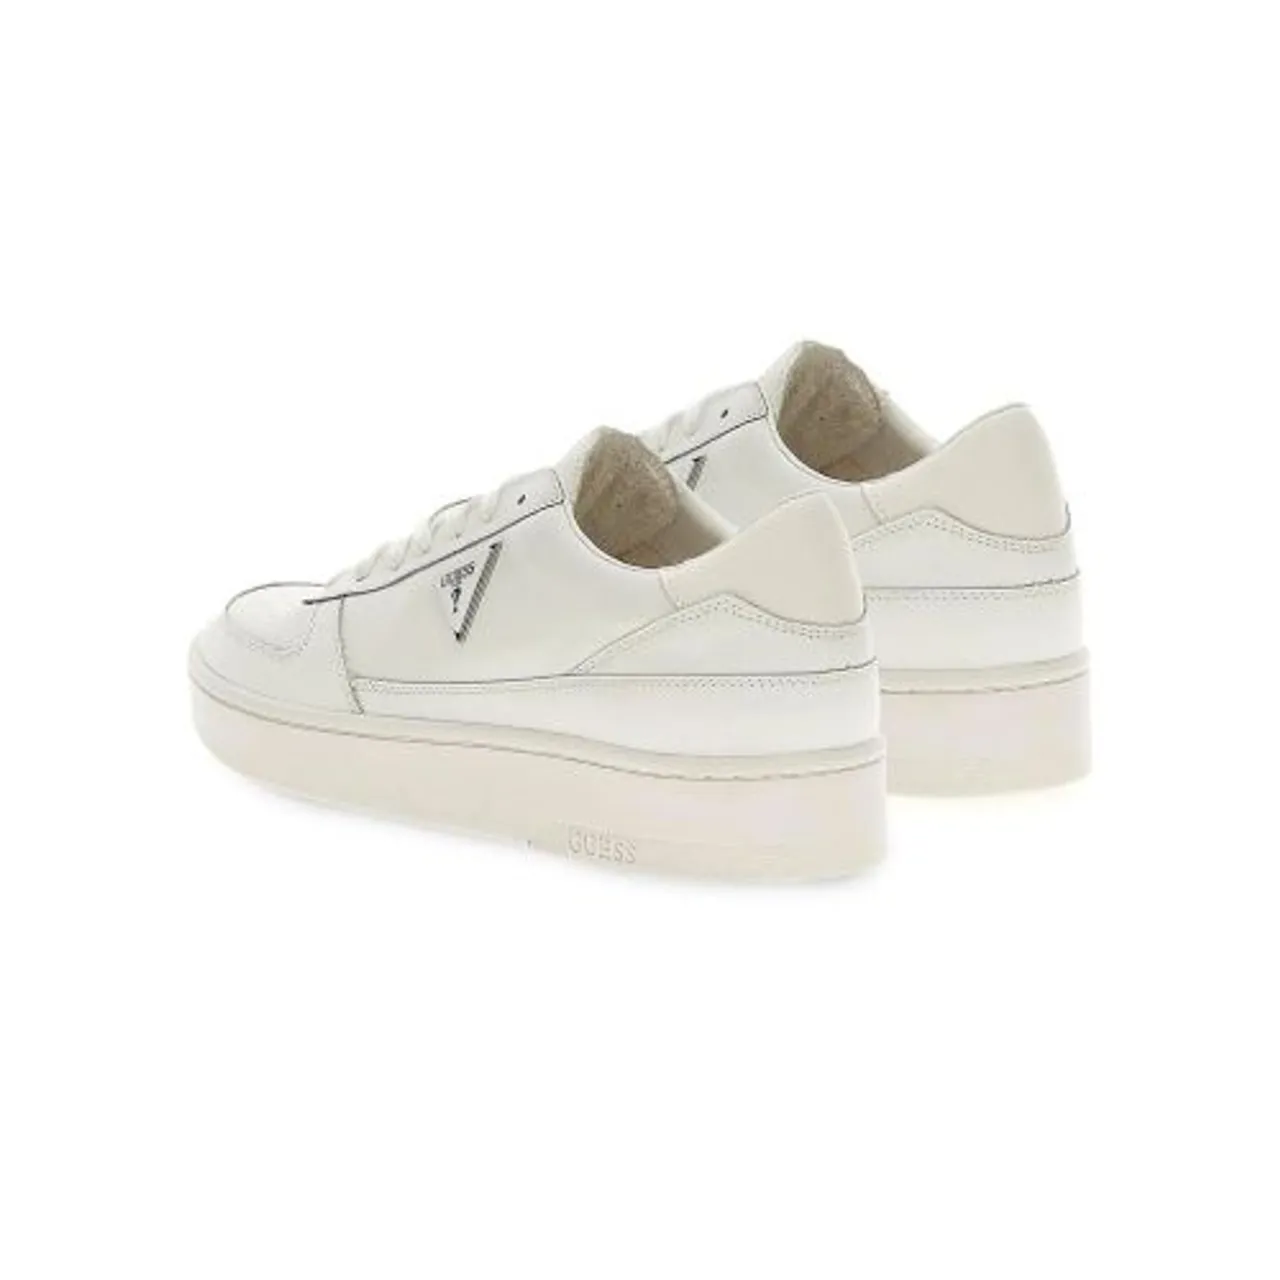 GUESS Mens White Silea Trainer